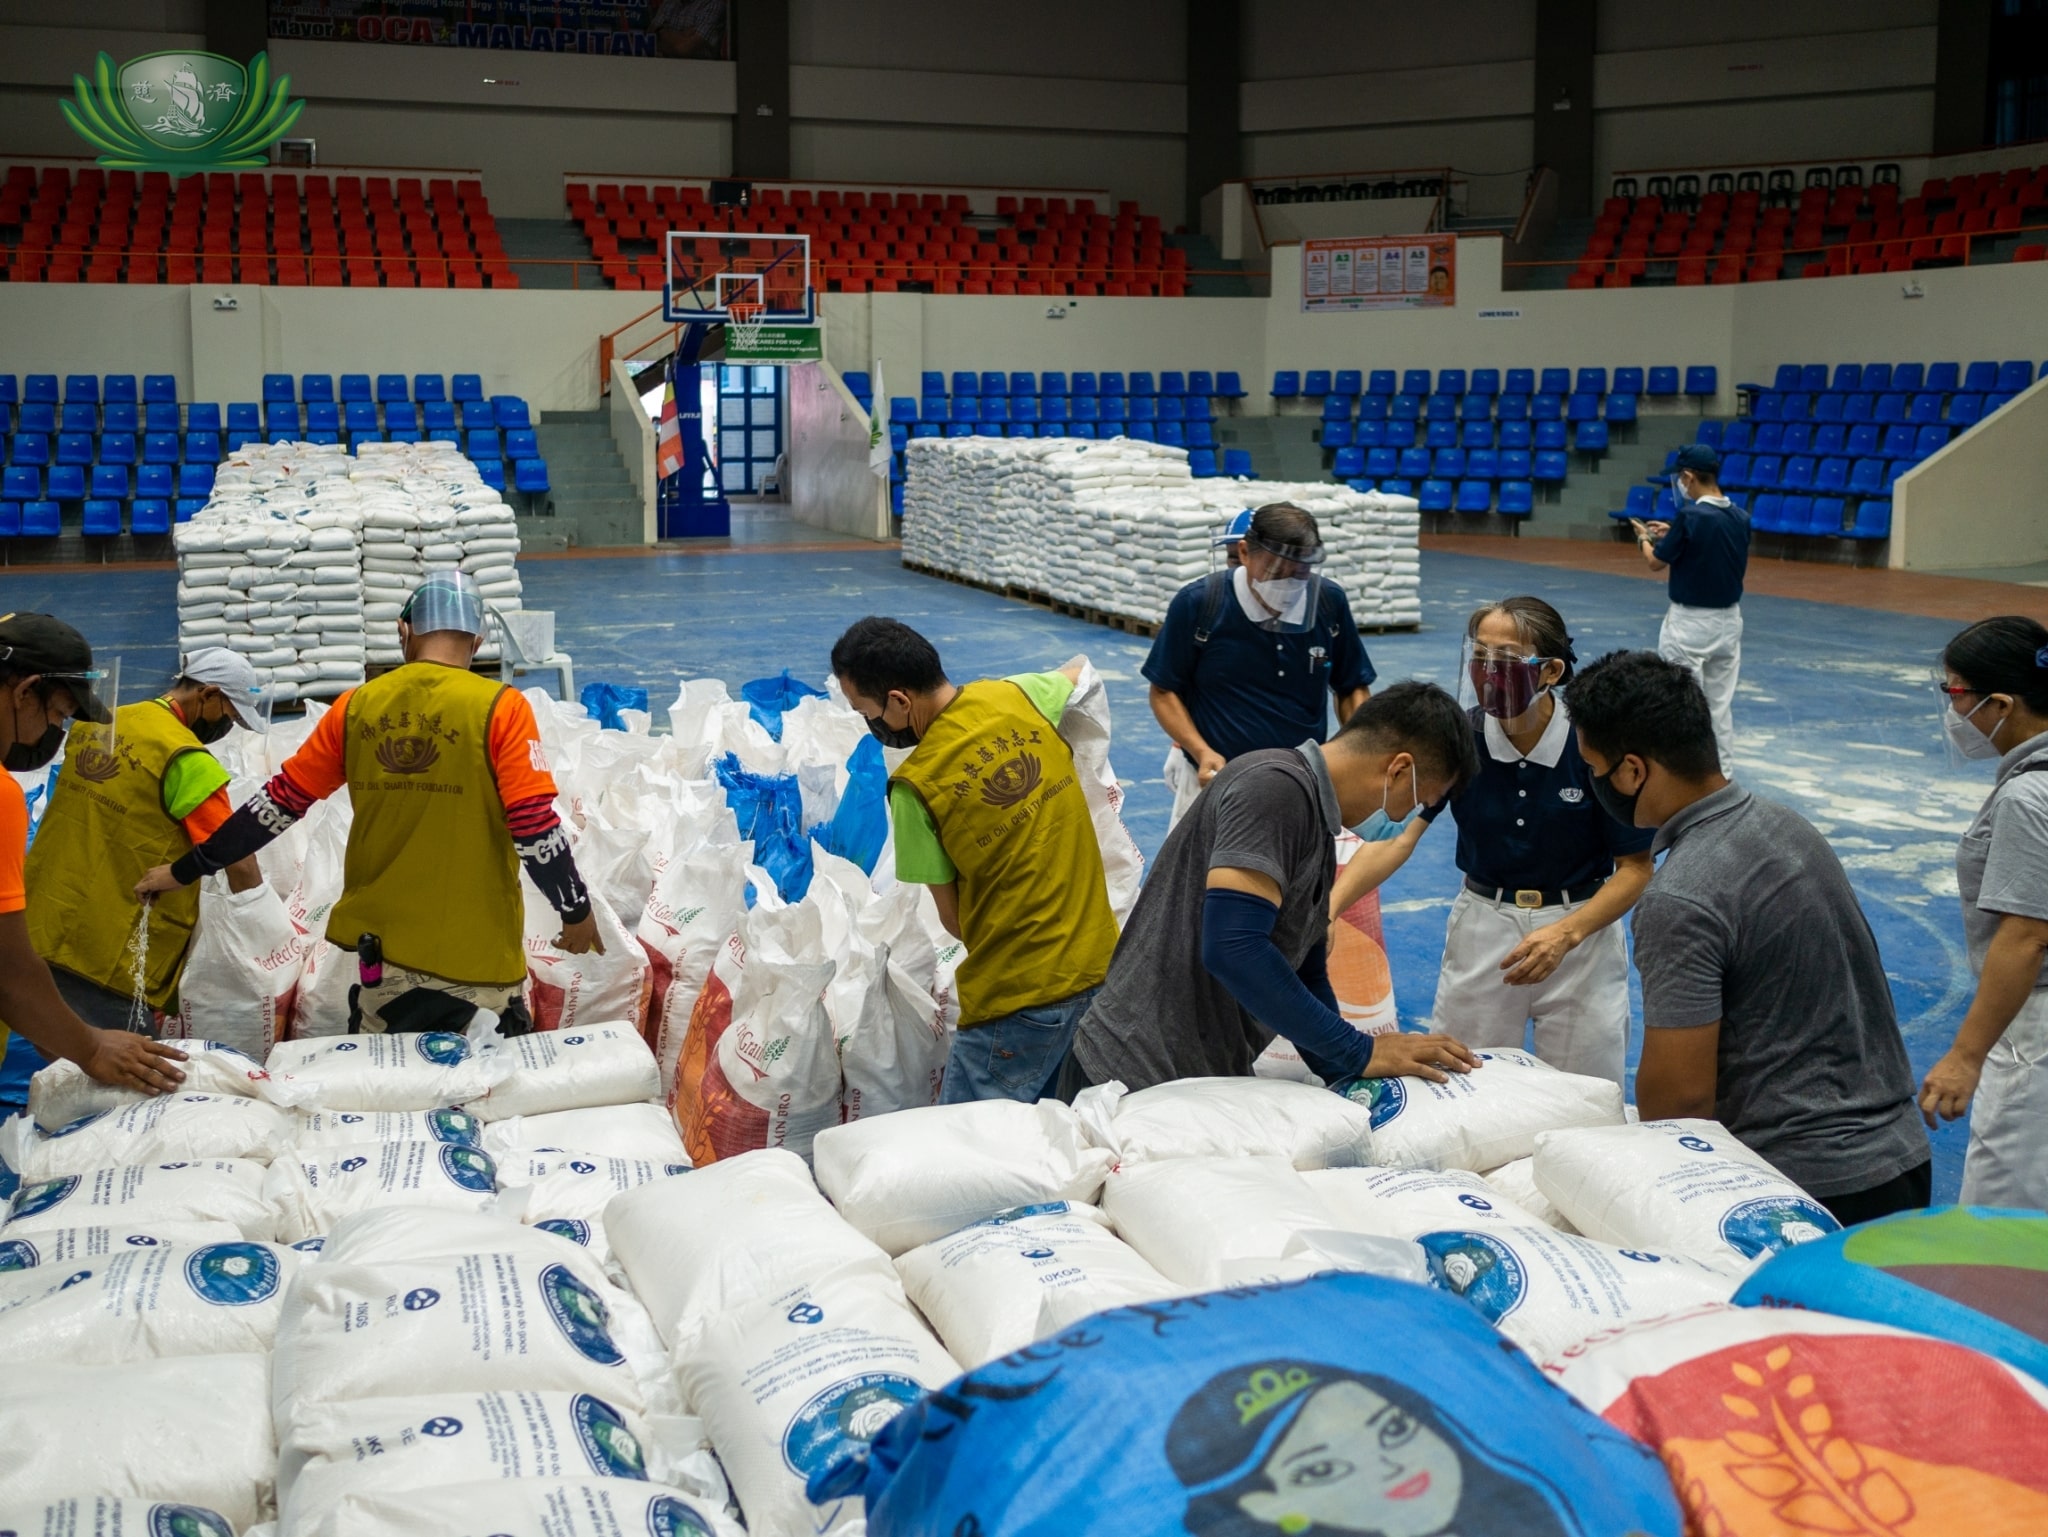 Tzu Chi volunteers prepare sacks of rice before beneficiaries come to claim them. 【Photo by Daniel Lazar】